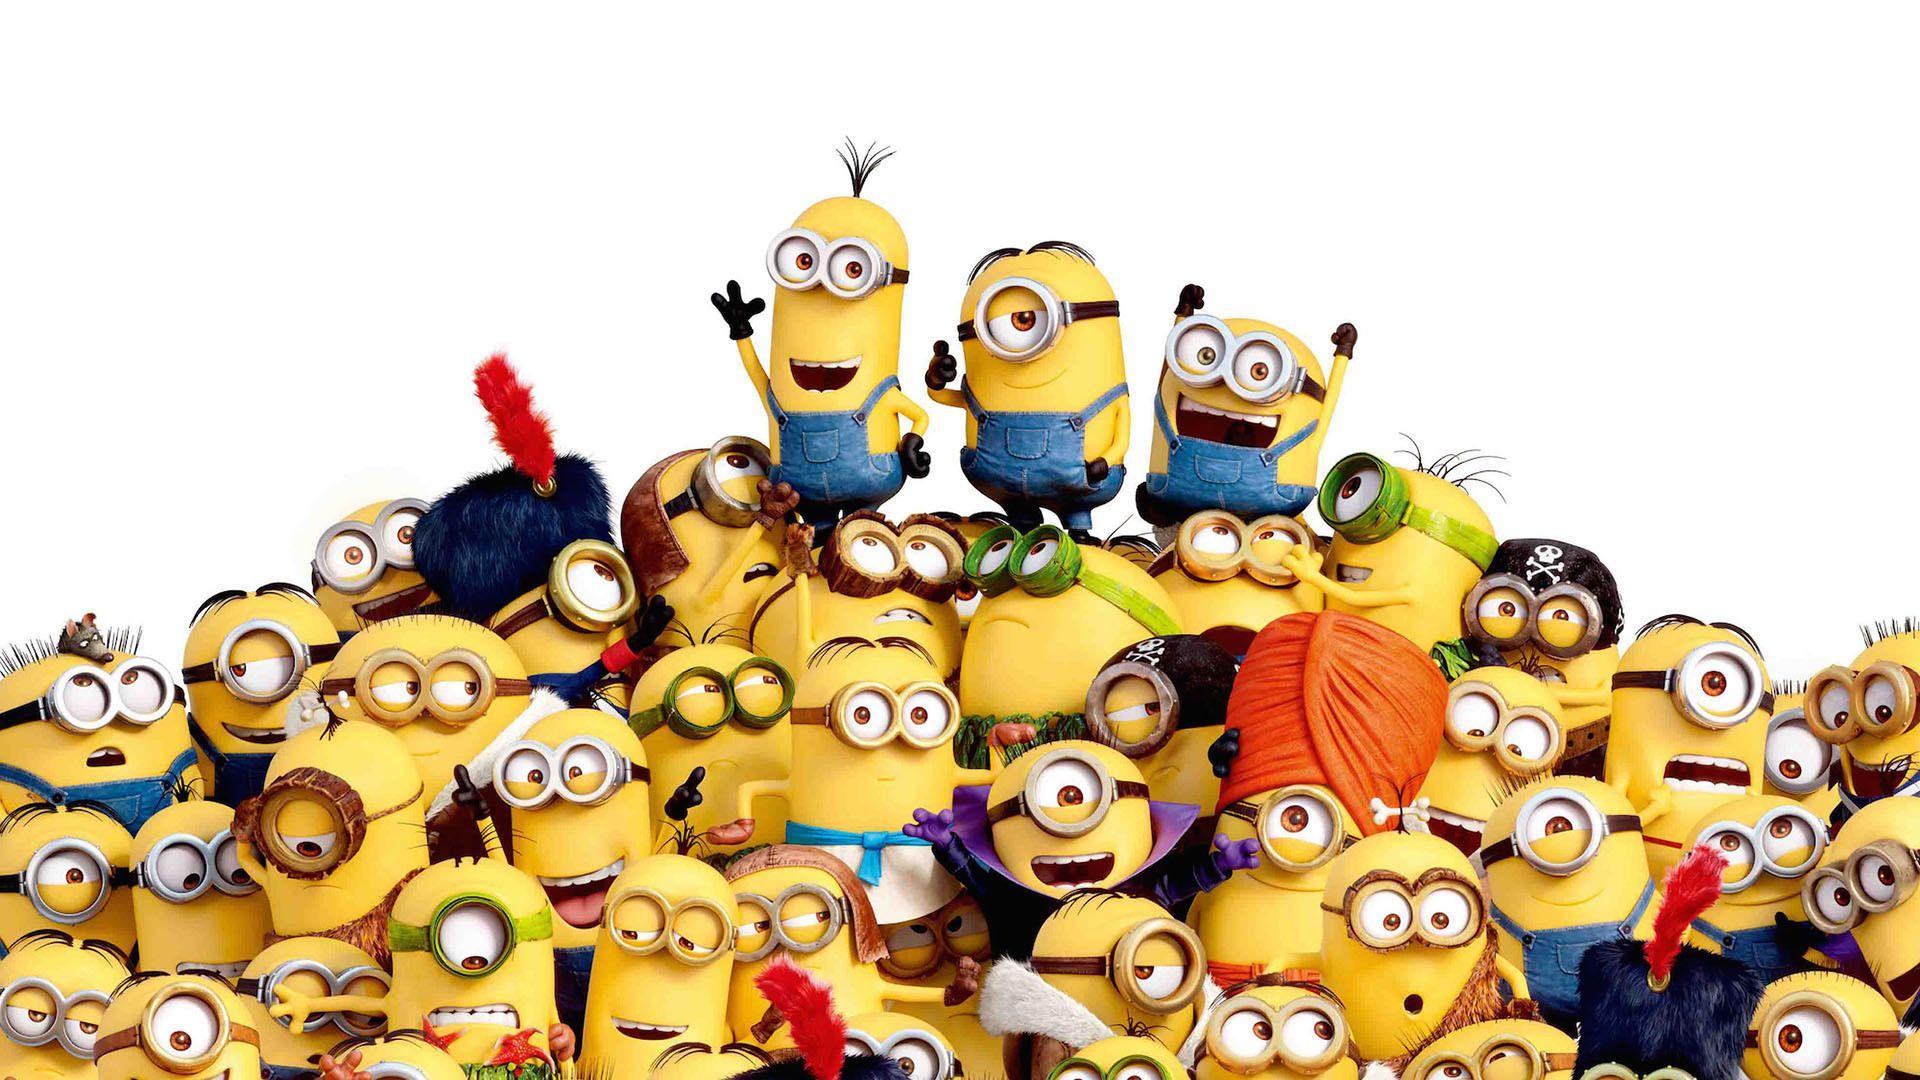  Minion  Wallpapers  1920x1080 Wallpaper  Cave